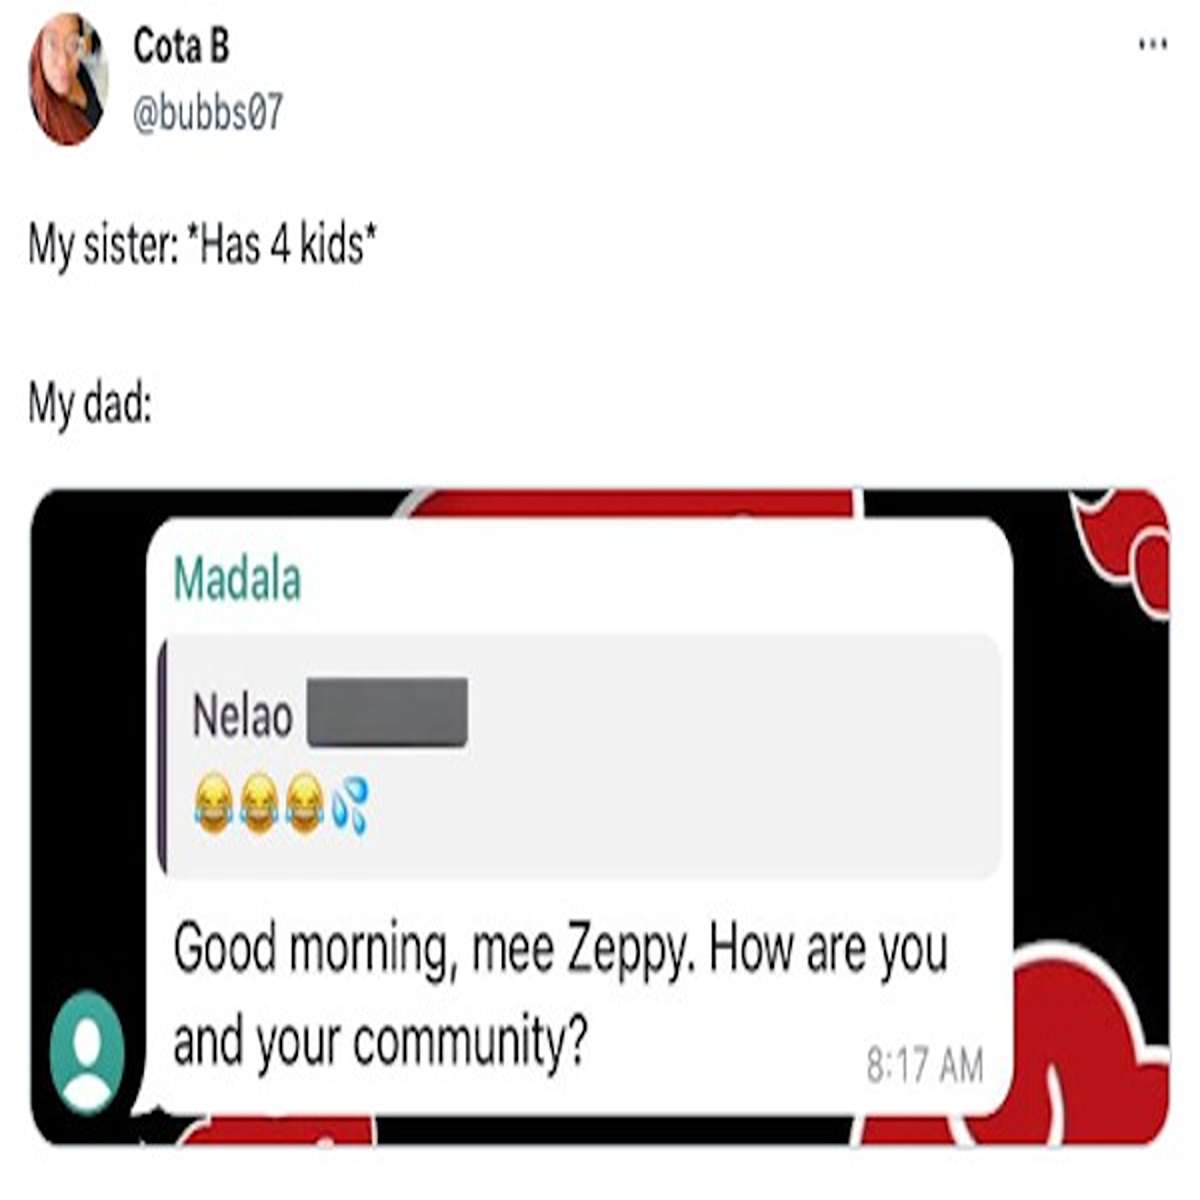 funny tweets and memes - software - Cota B My sister Has 4 kids My dad Madala Nelao Good morning, mee Zeppy. How are you and your community?